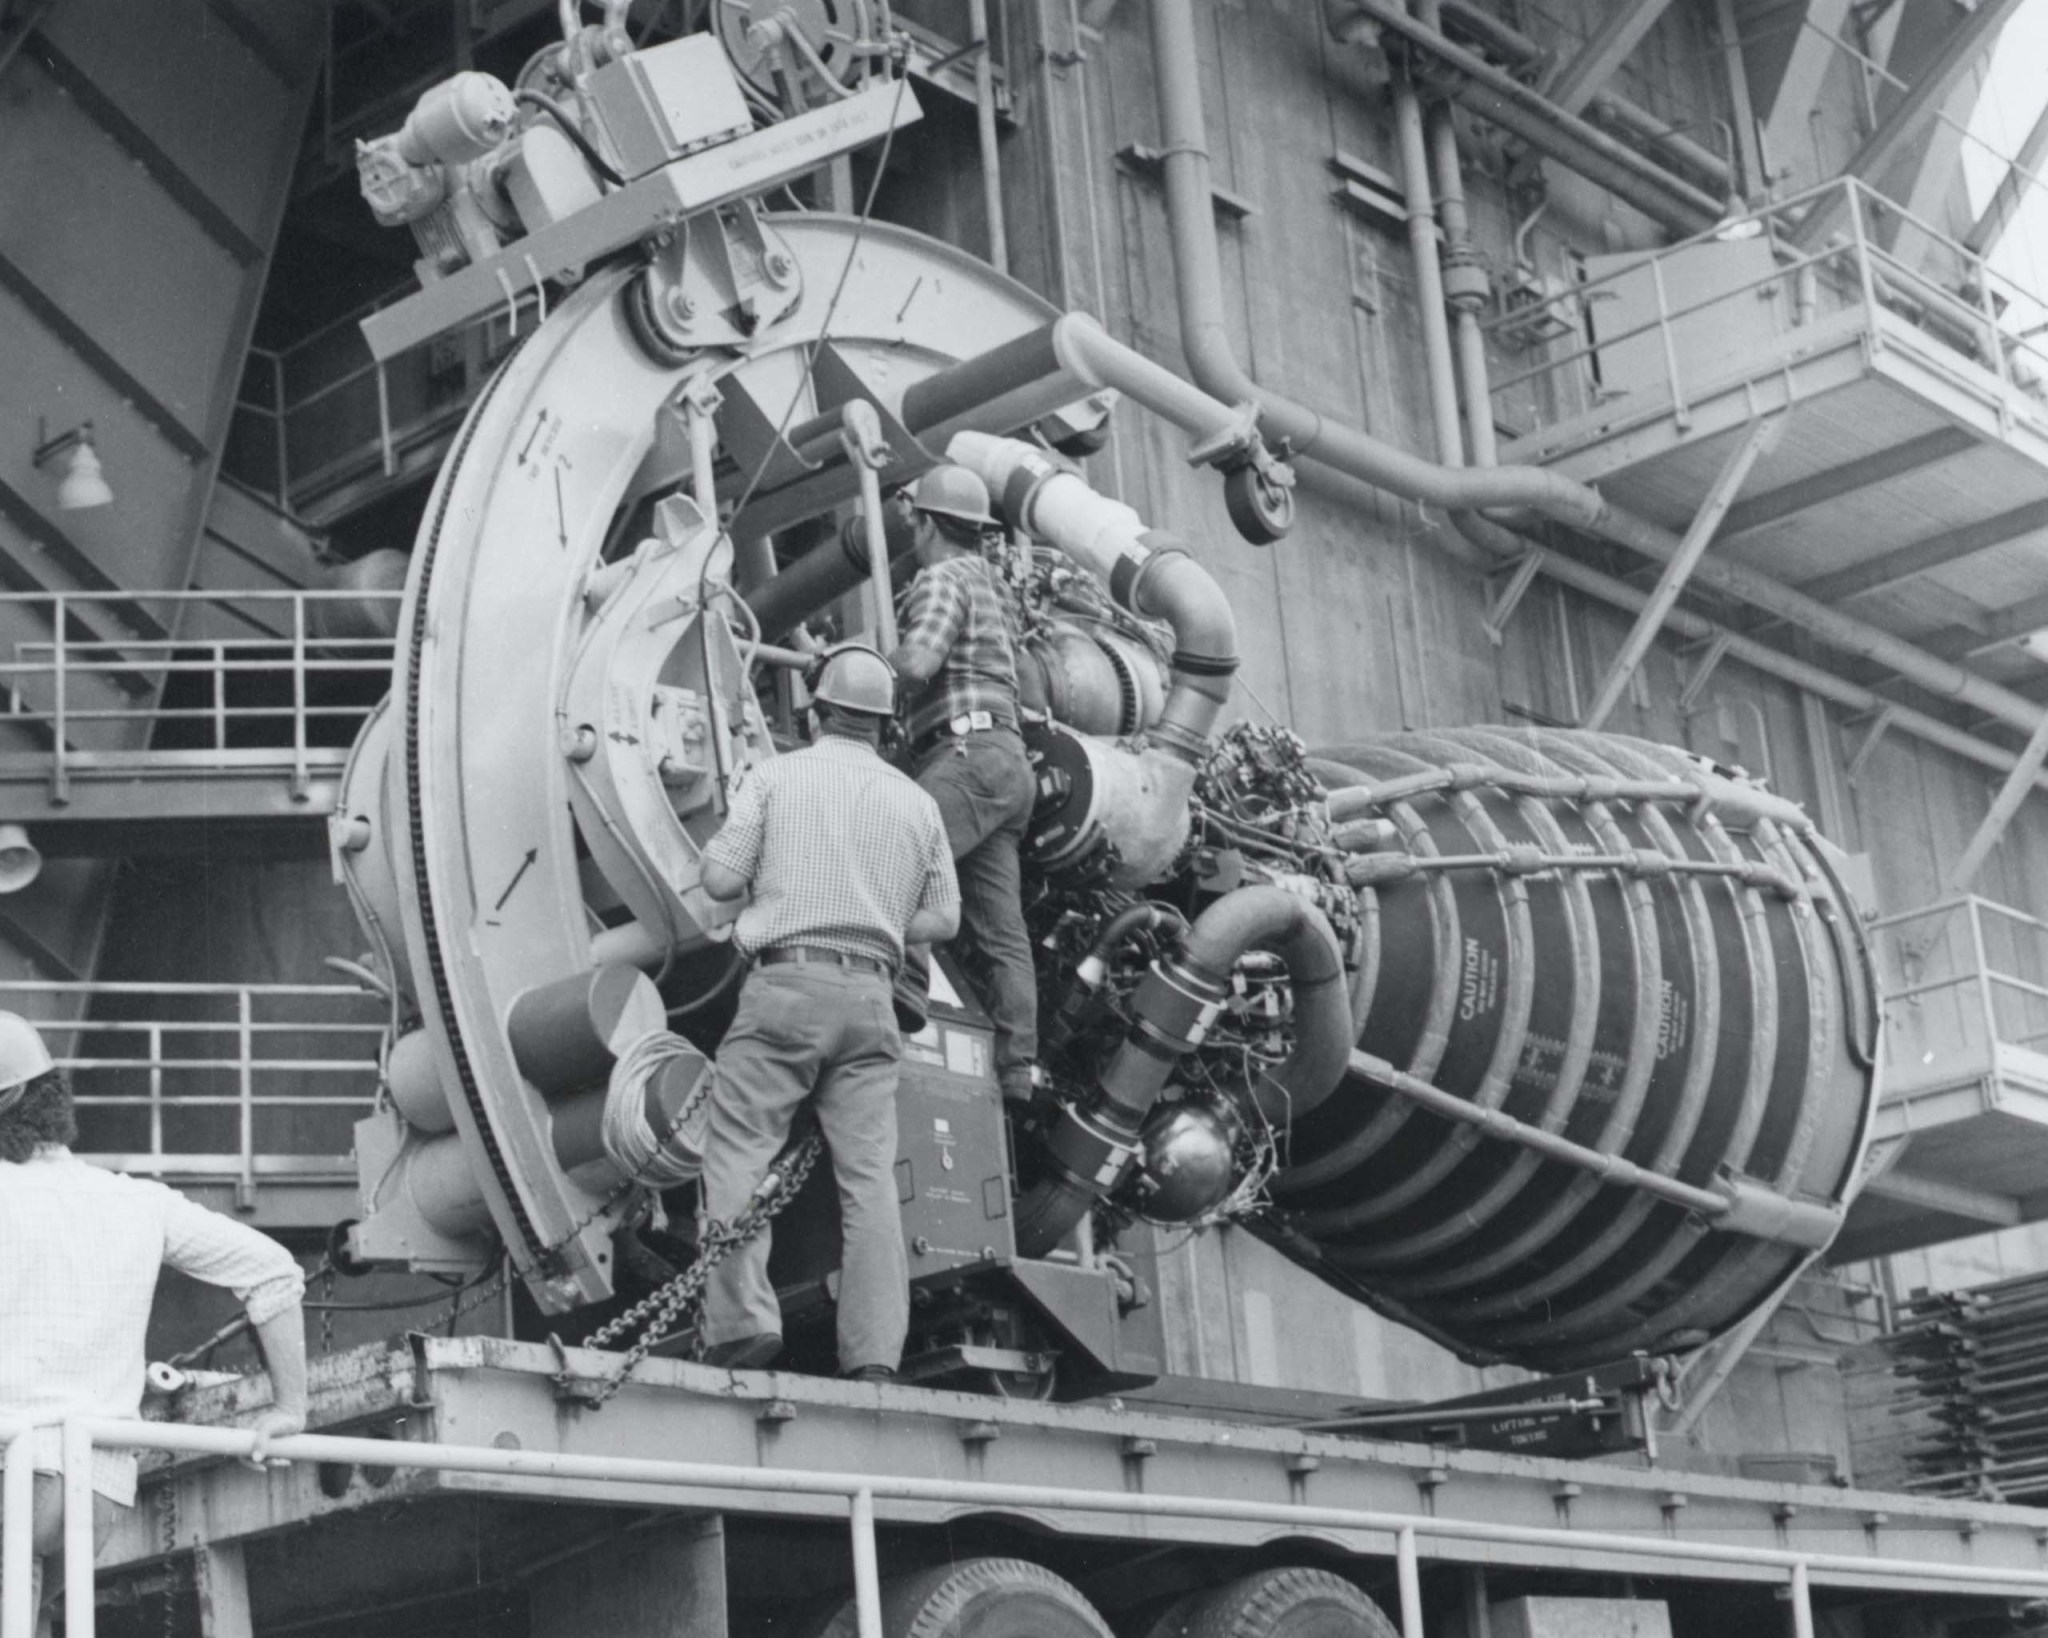 a black and white image of work crews preparing to lift a space shuttle main engine for testing at Stennis Space Center in 1979